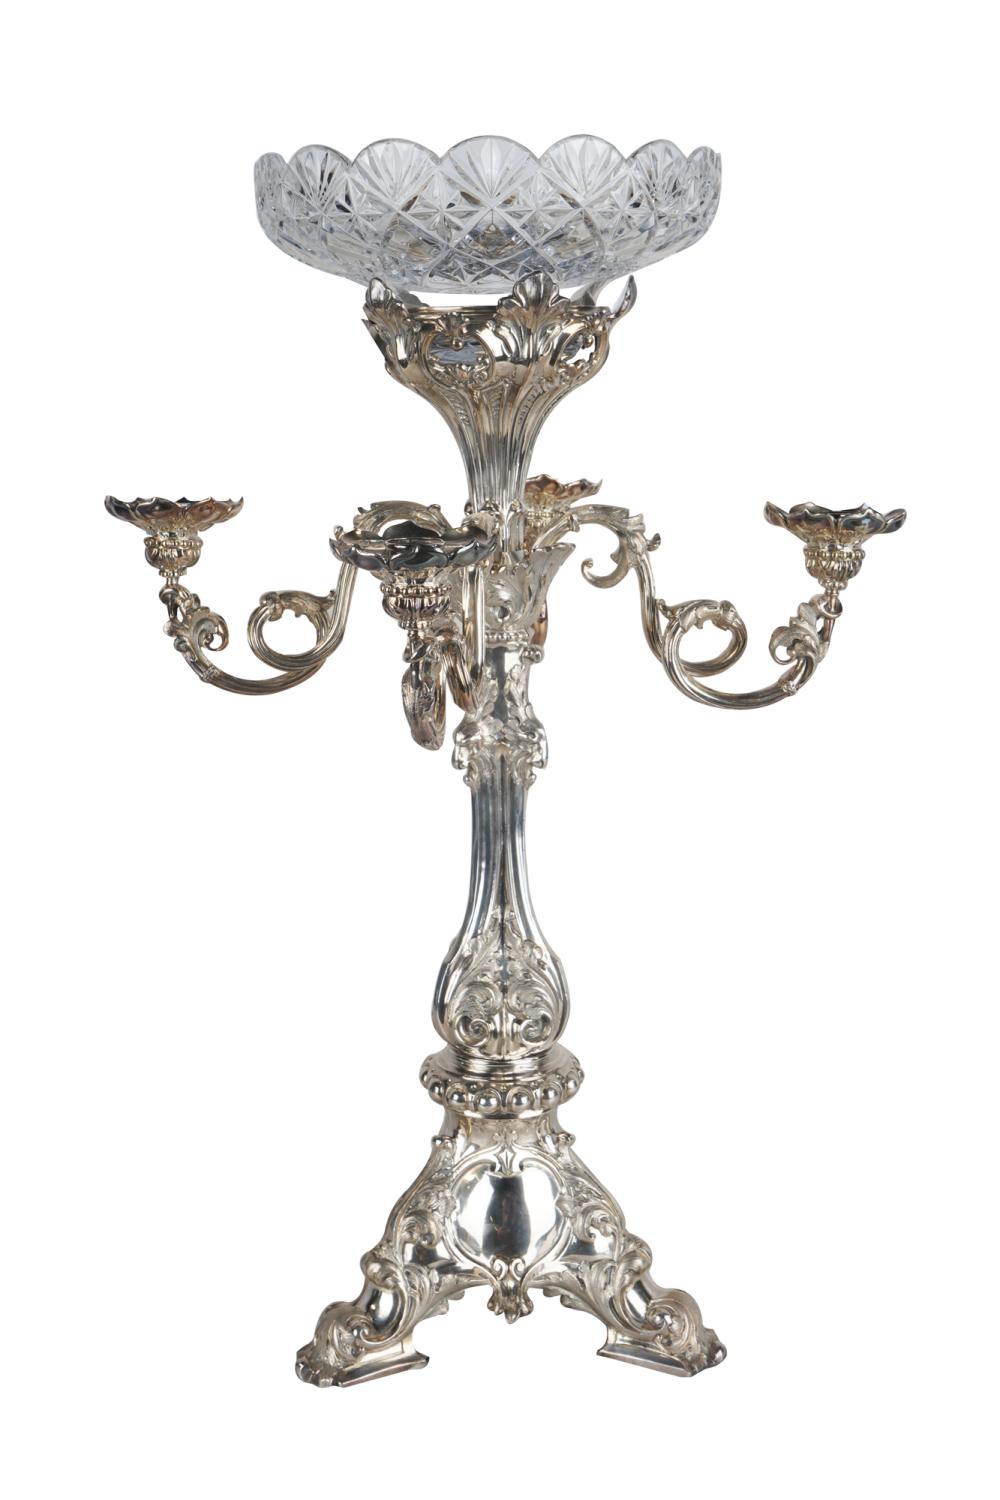 SILVERPLATE CUT GLASS EPERGNEwith 336933